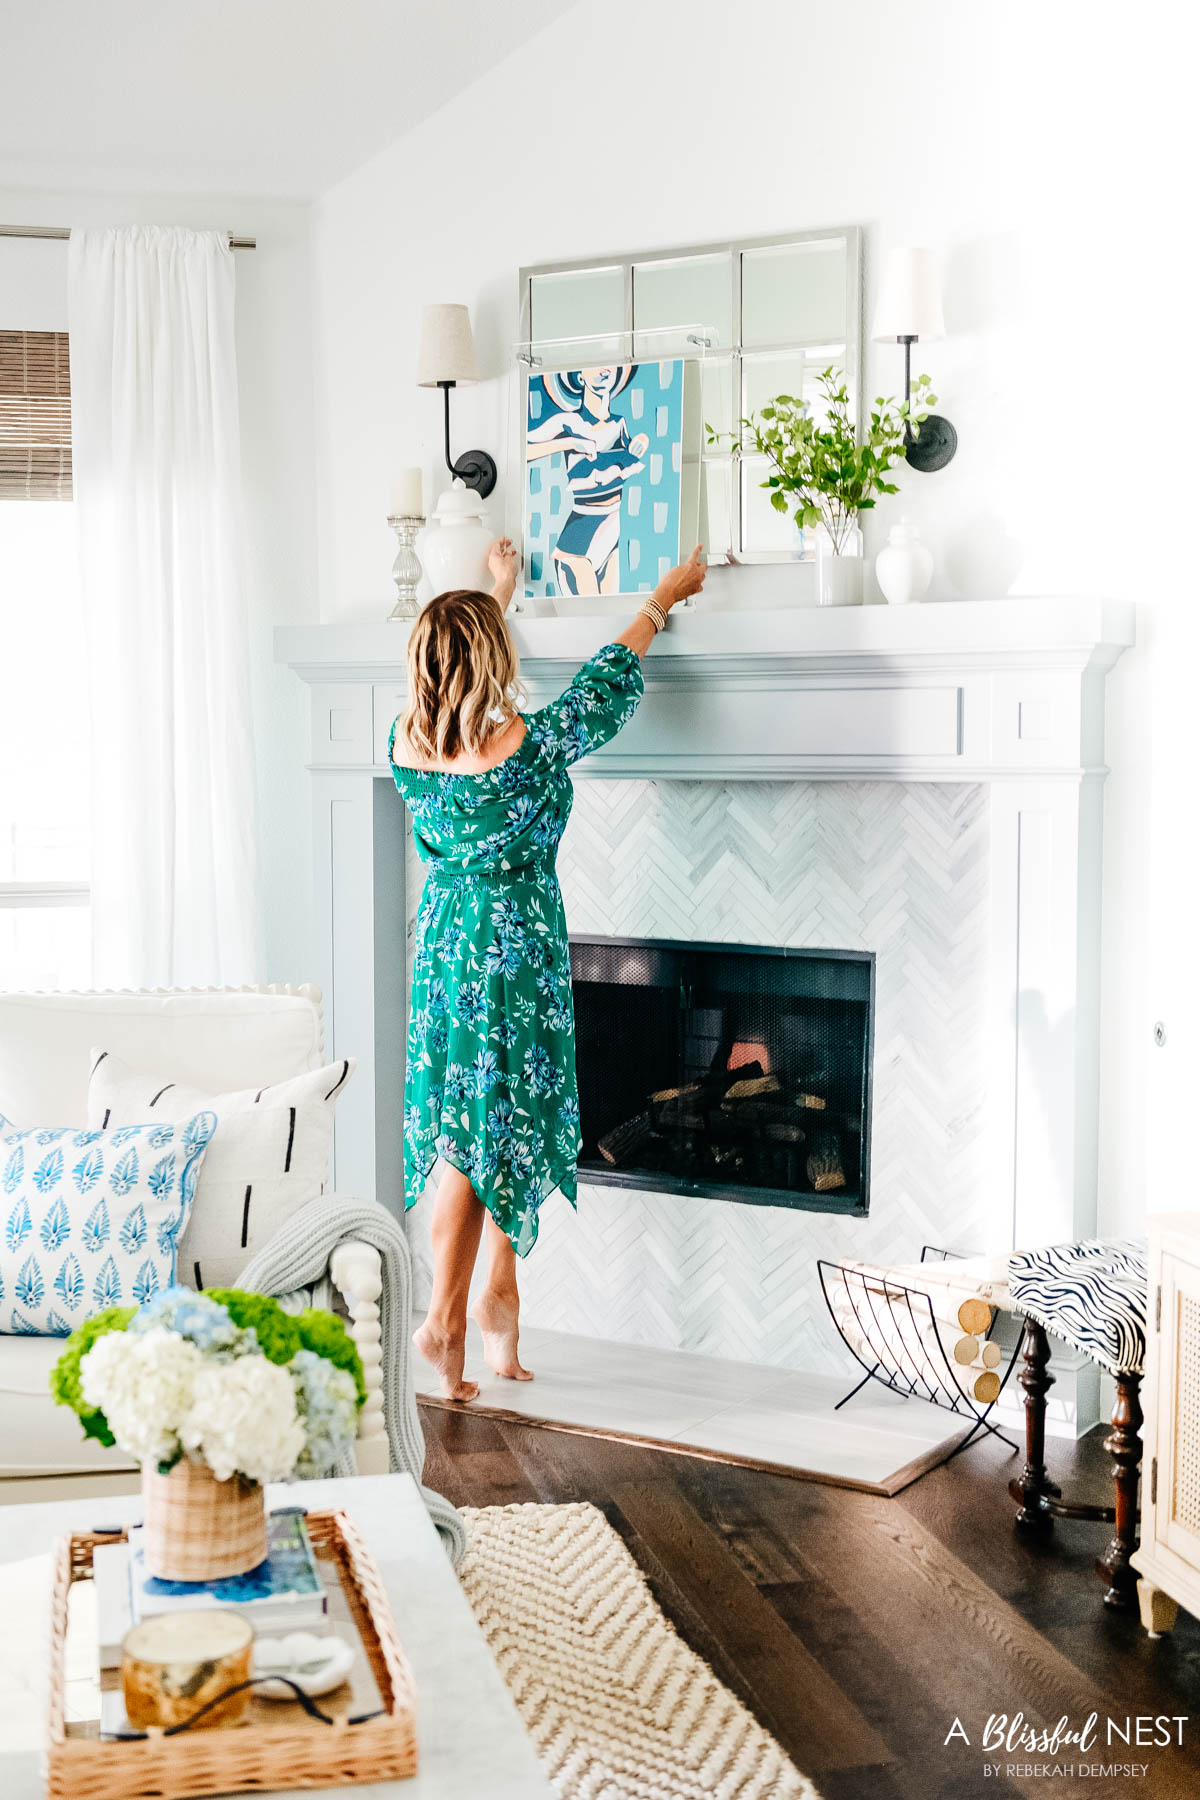 styling a fireplace mantel with artwork, mirror, flowers, and candlesticks